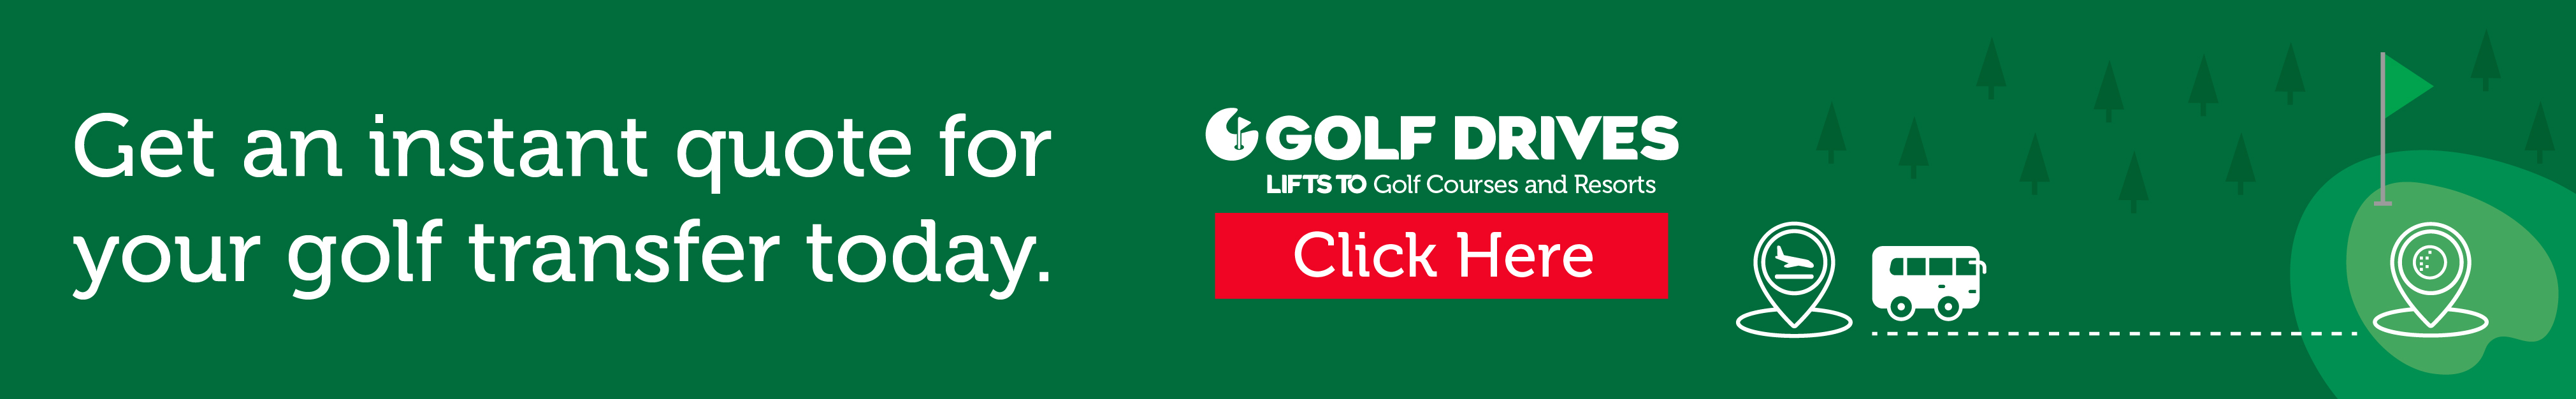 Get an instant quote for your golf transfer today